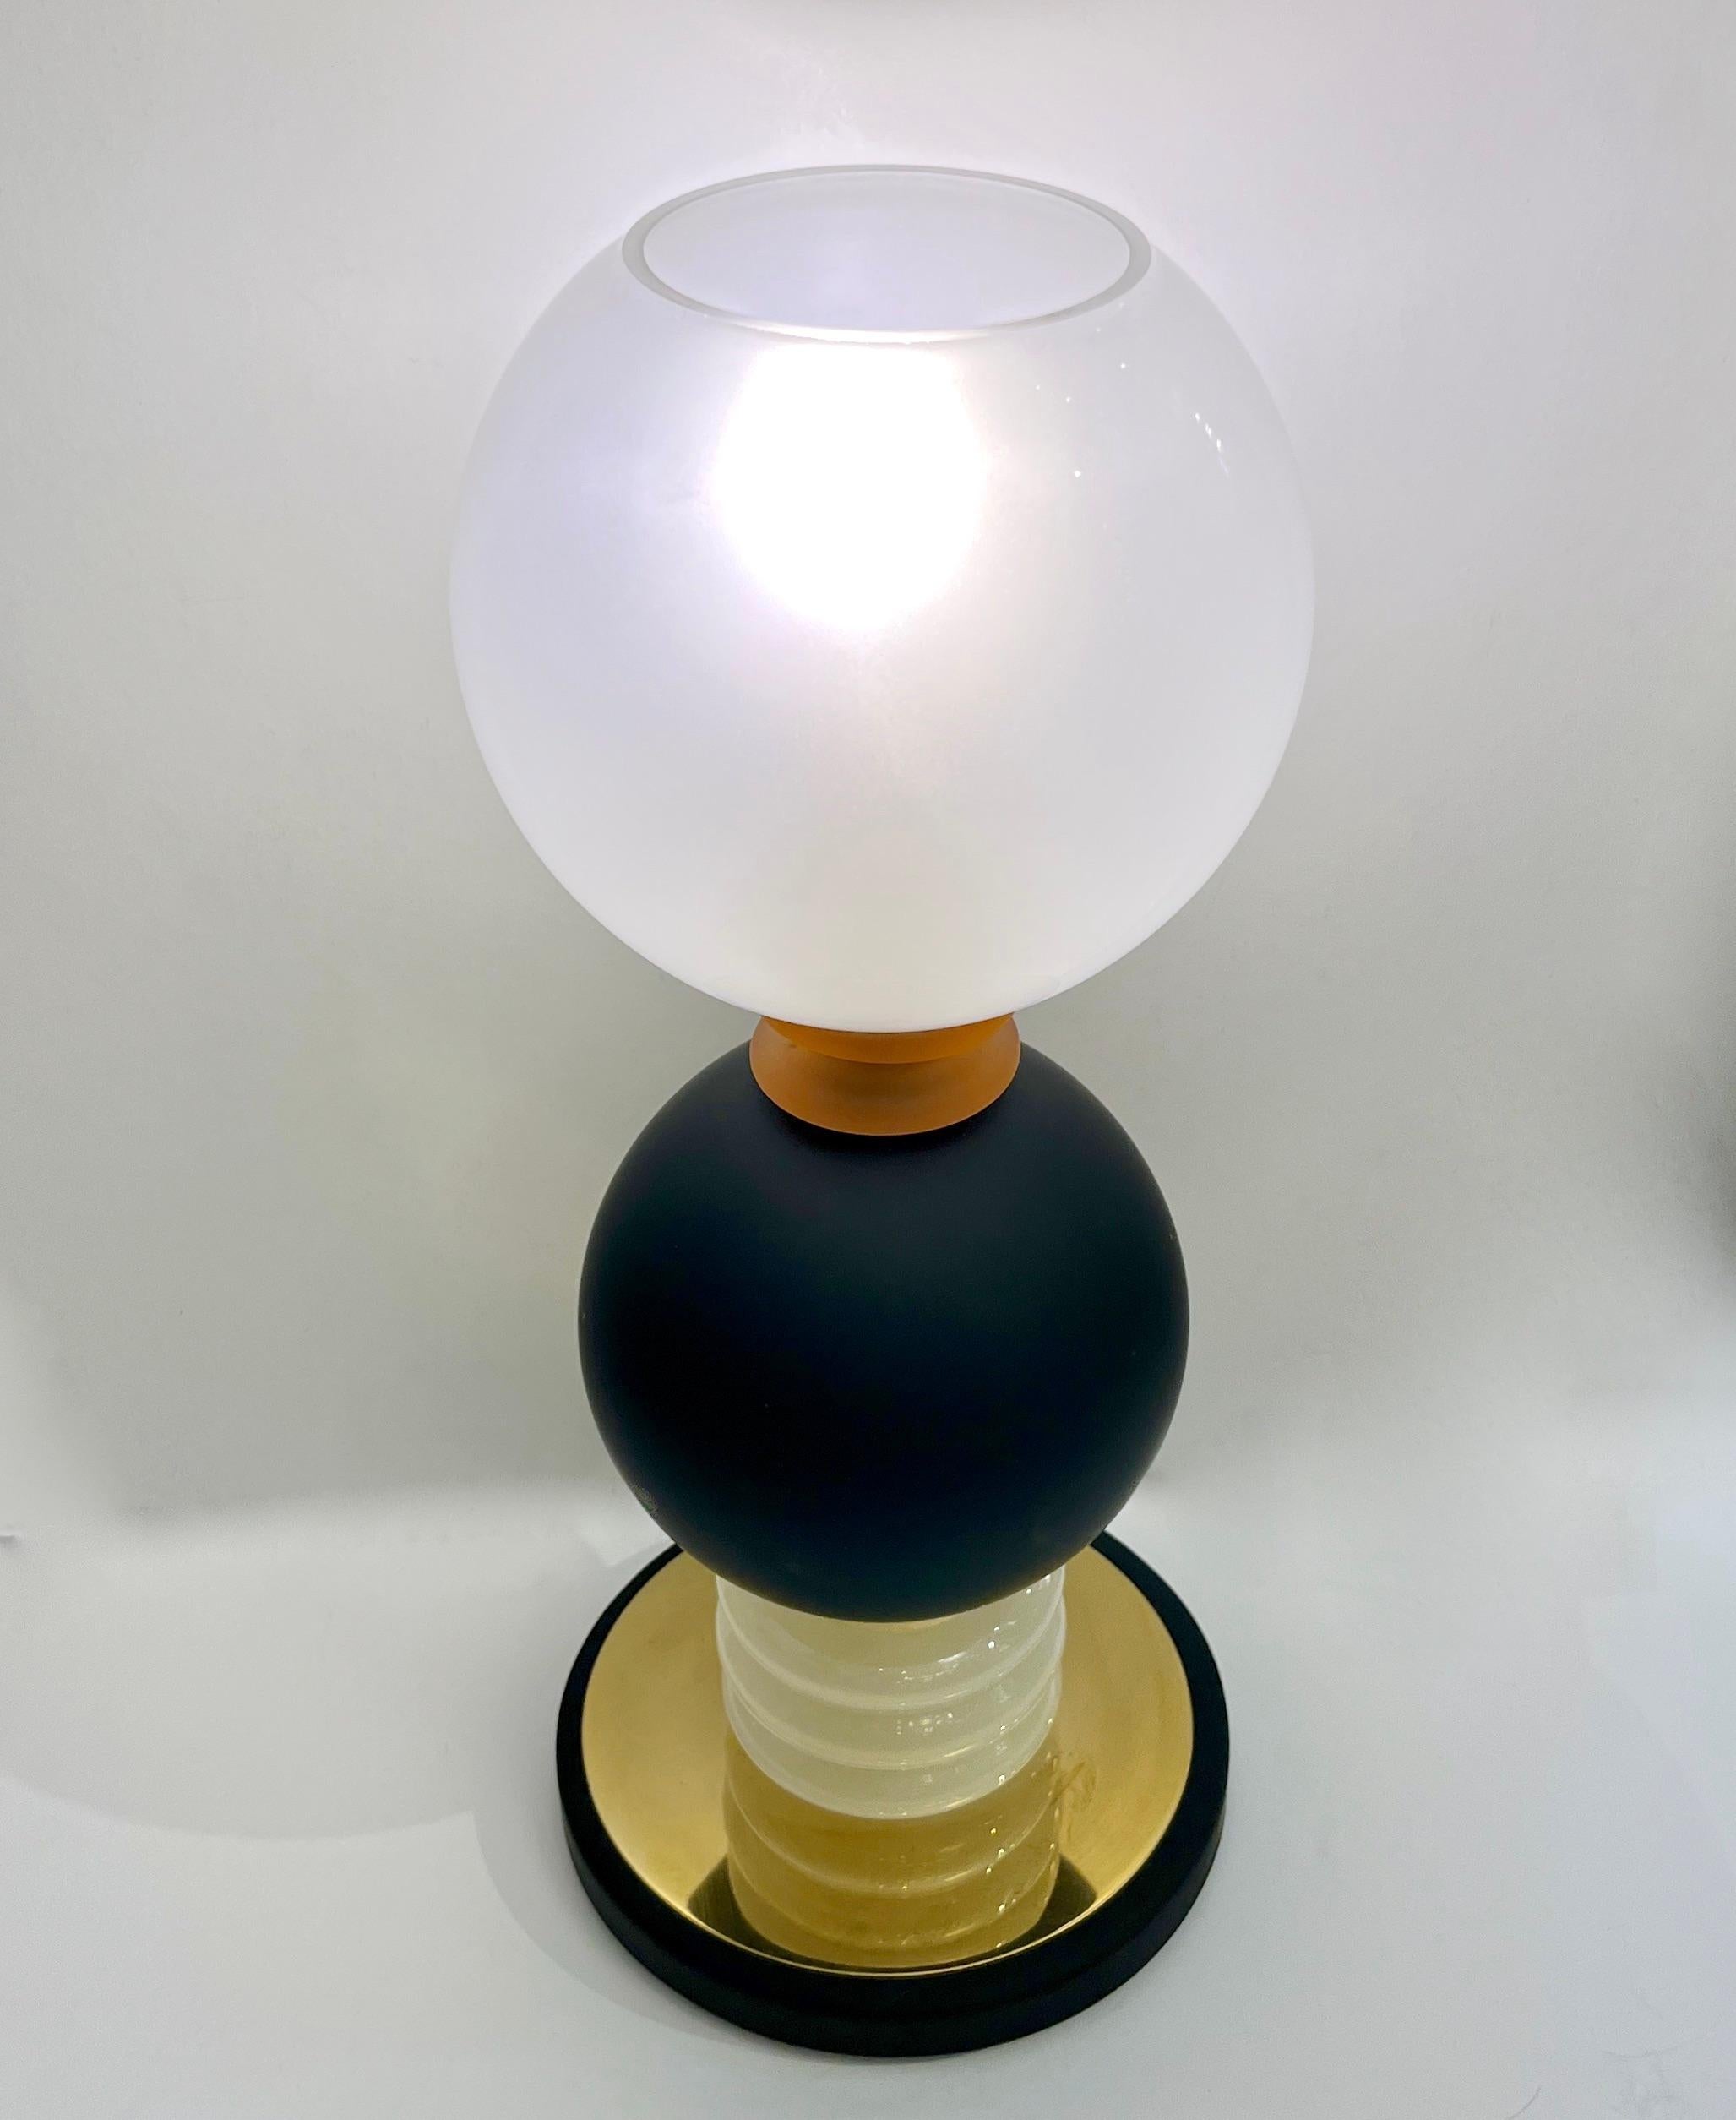 A unique pair of Made in Italy Tower Lamps, an attractive and functional design, with a round black cold-painted metal base covered with brass that supports a curved milky white Murano glass element, a matte black Murano glass sphere highlighted by